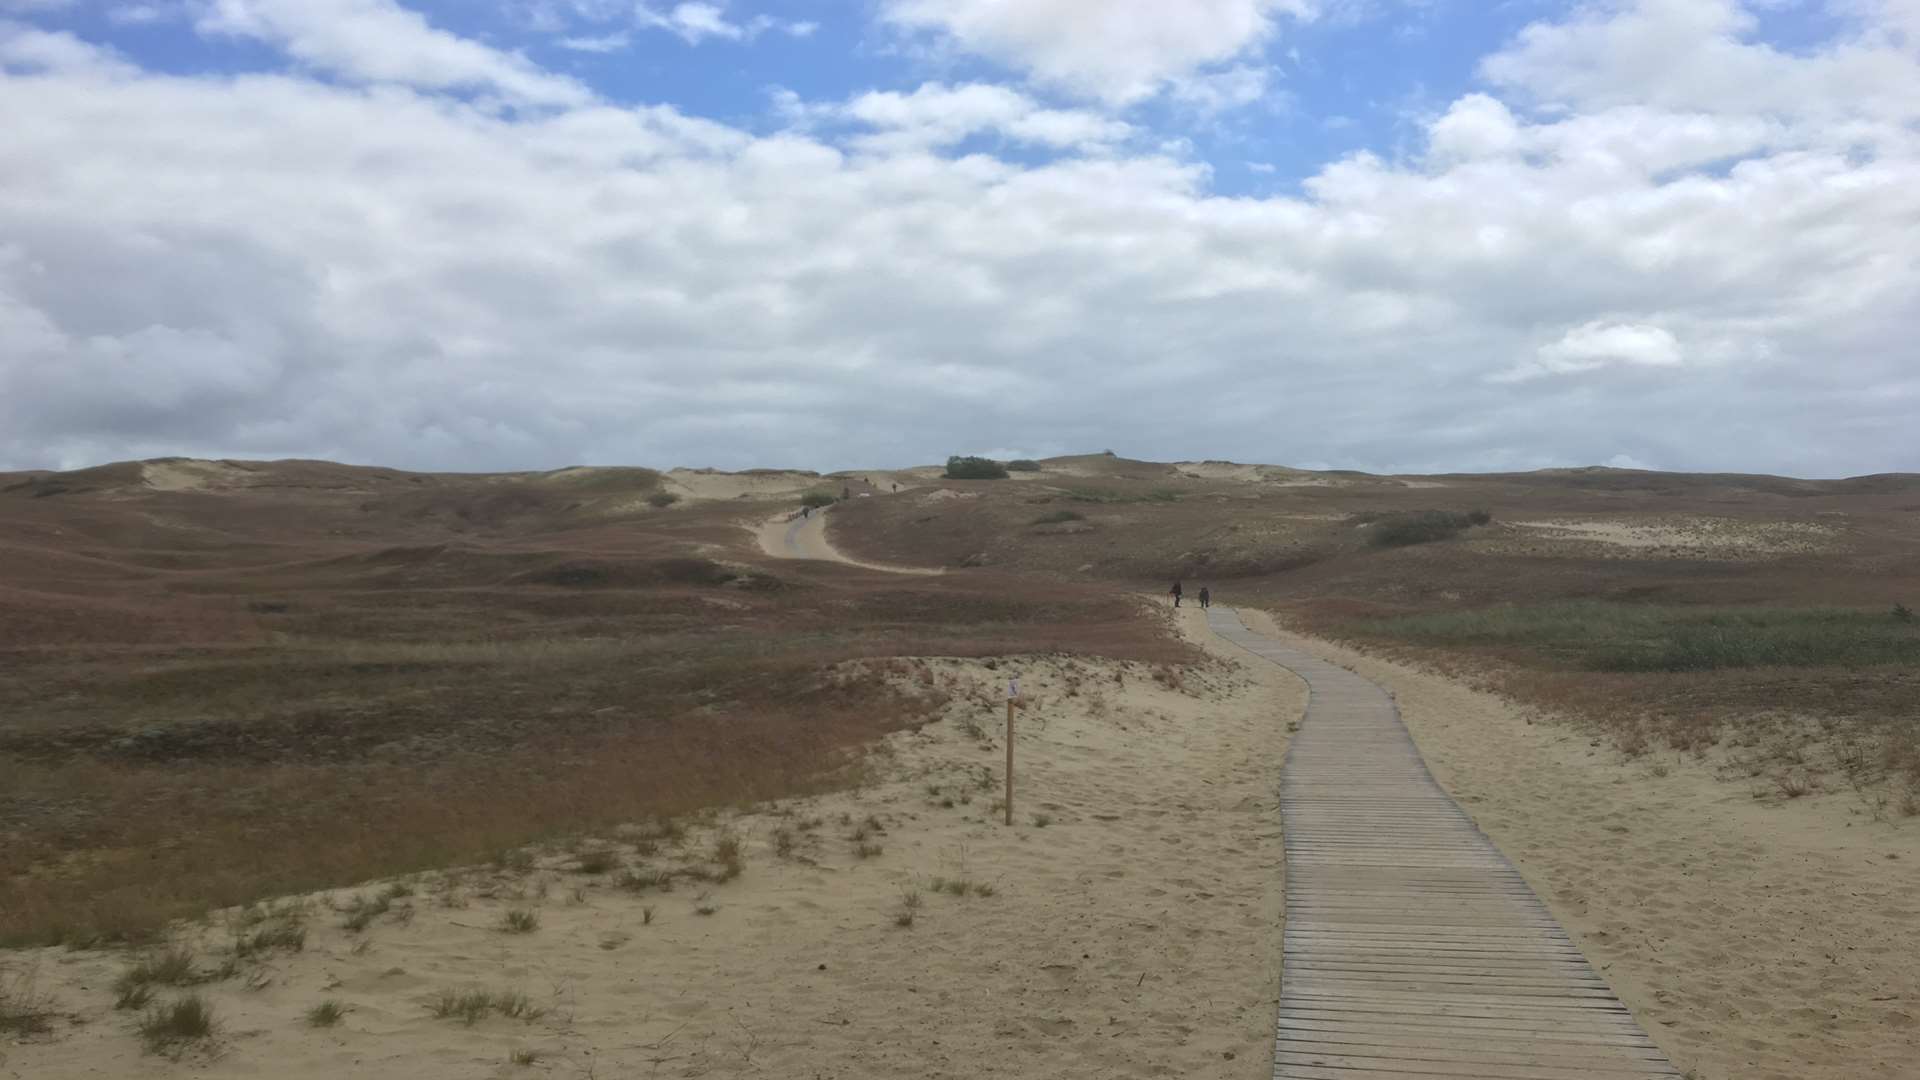 A 'dead' sand dune on the Curonian Spit, Lithuania. Picture: Ed McConnell